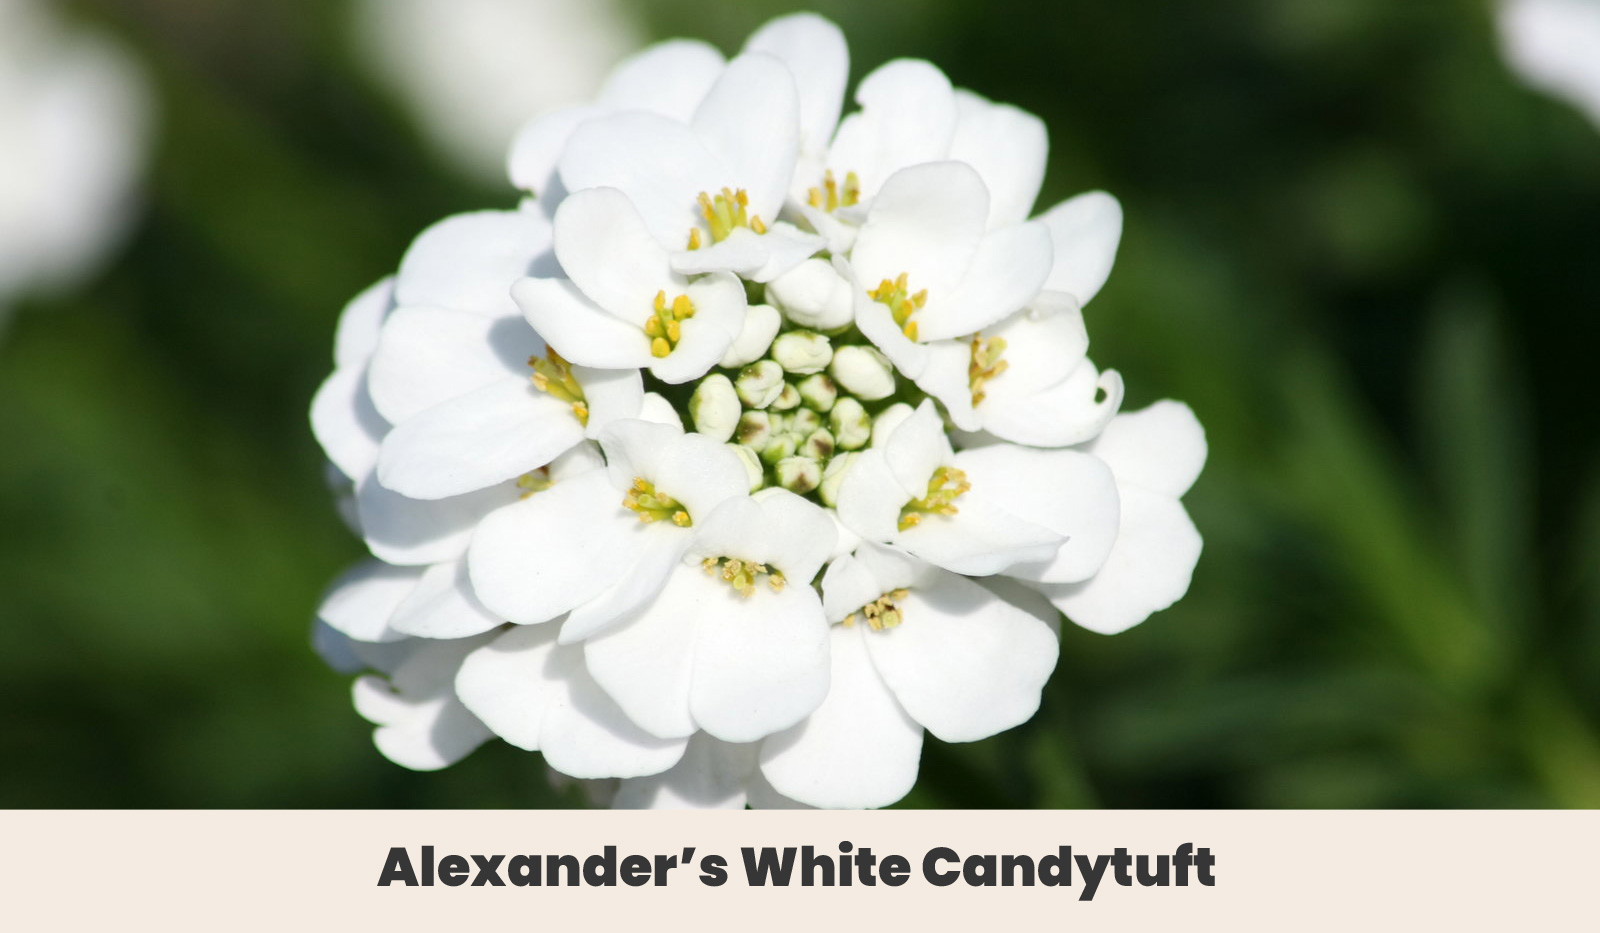 Alexanders White Candytuft